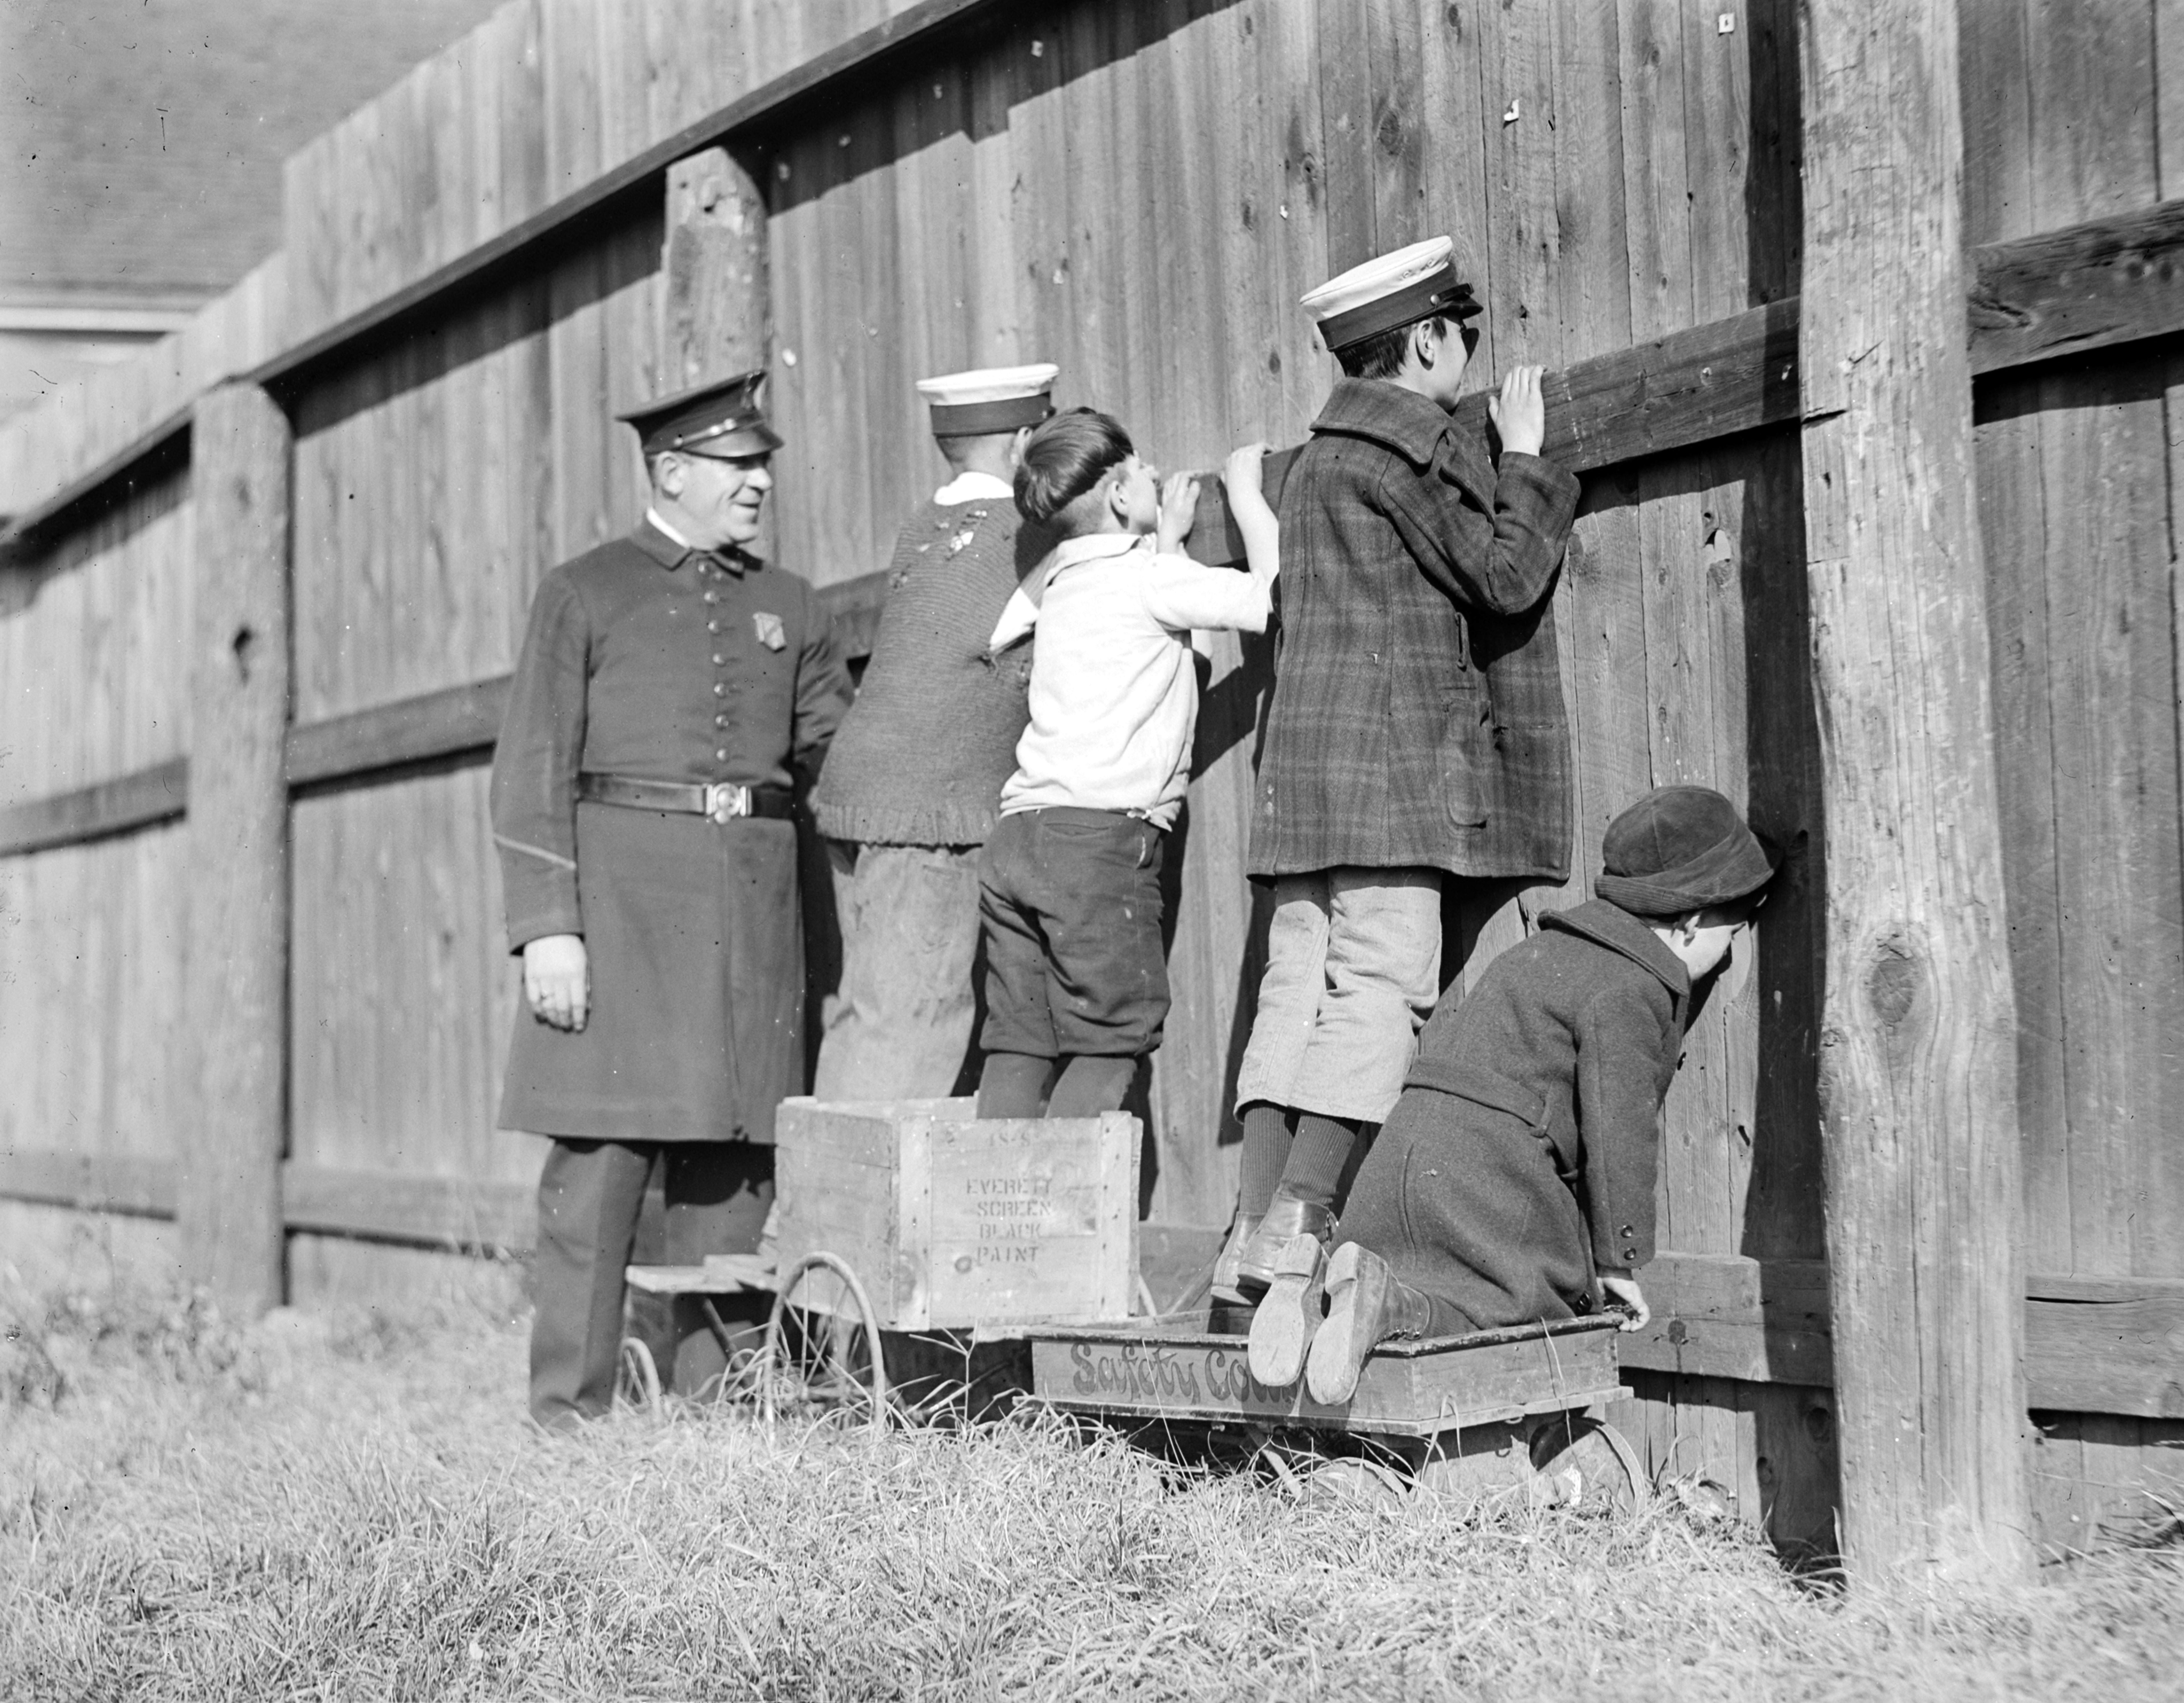 Cop joins baseball peekers at the fence in Massachusetts (c. 1930).jpg